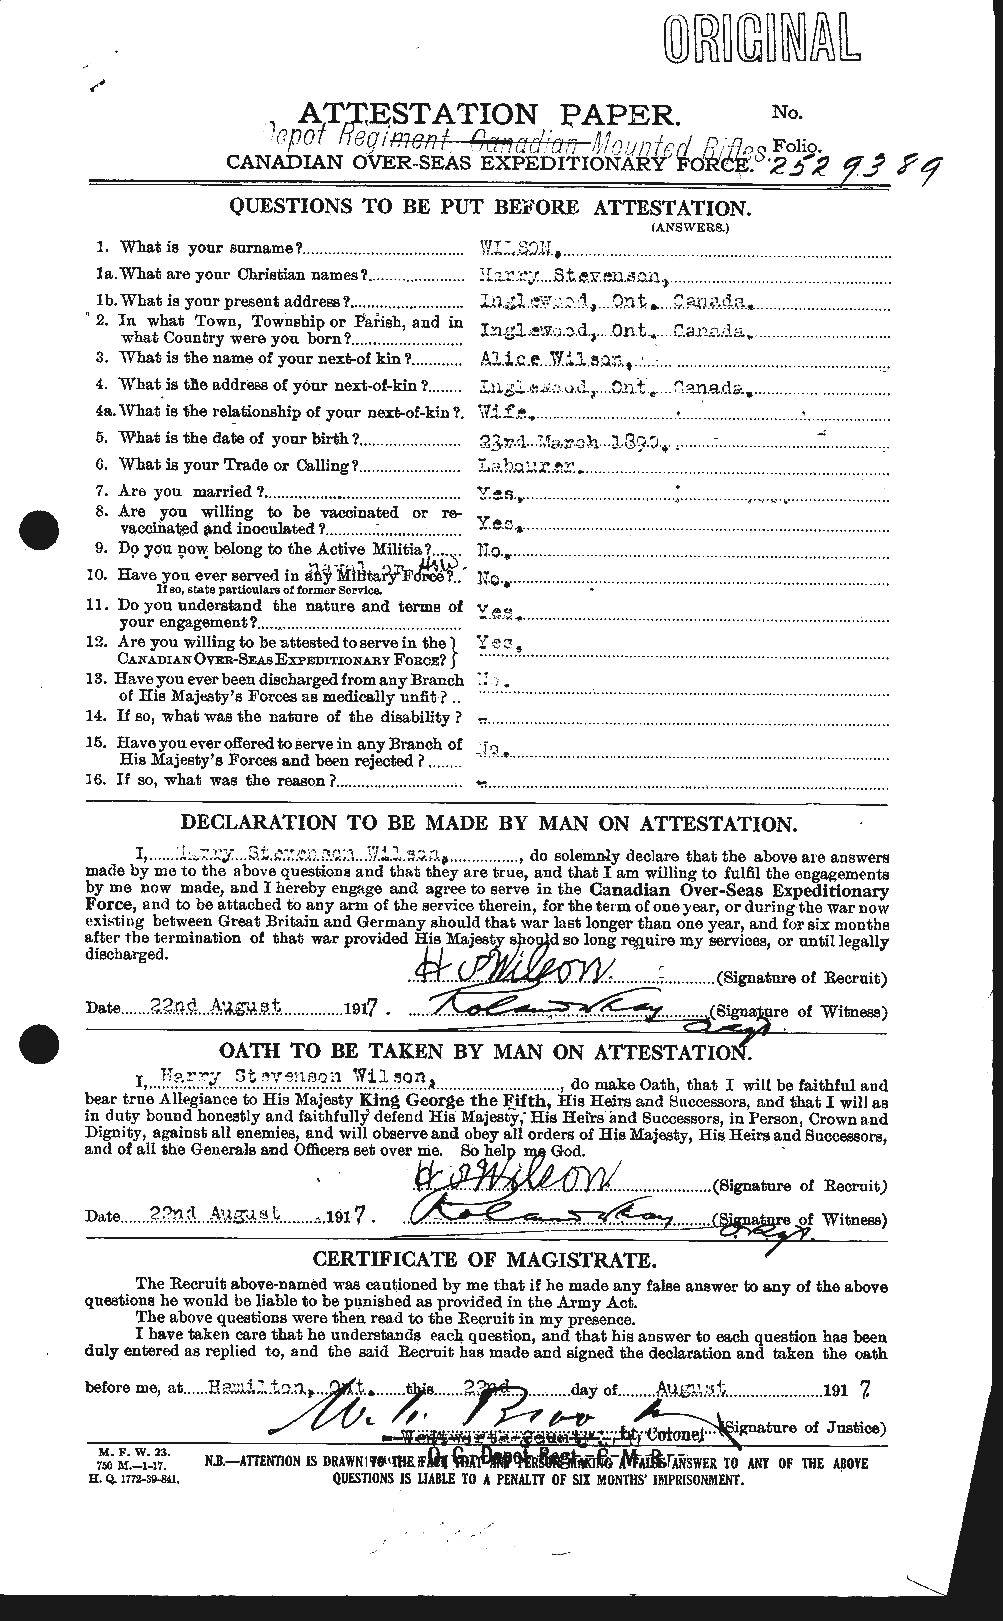 Personnel Records of the First World War - CEF 679473a